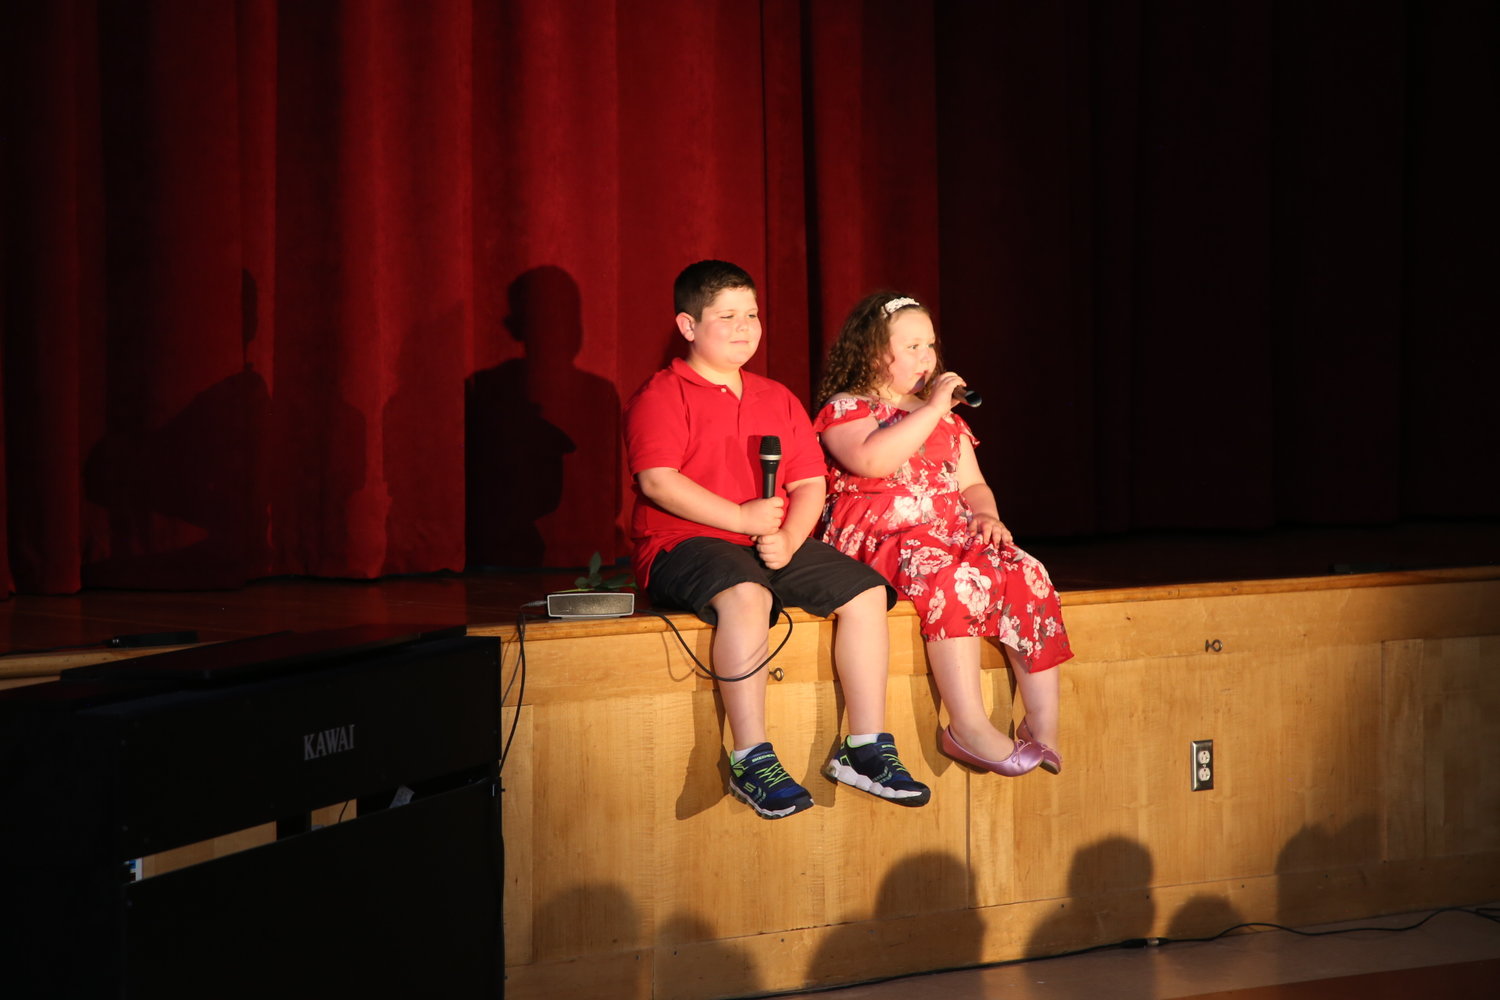 Lily and Noah Riolo- Duet “Rose” by Bette Midler